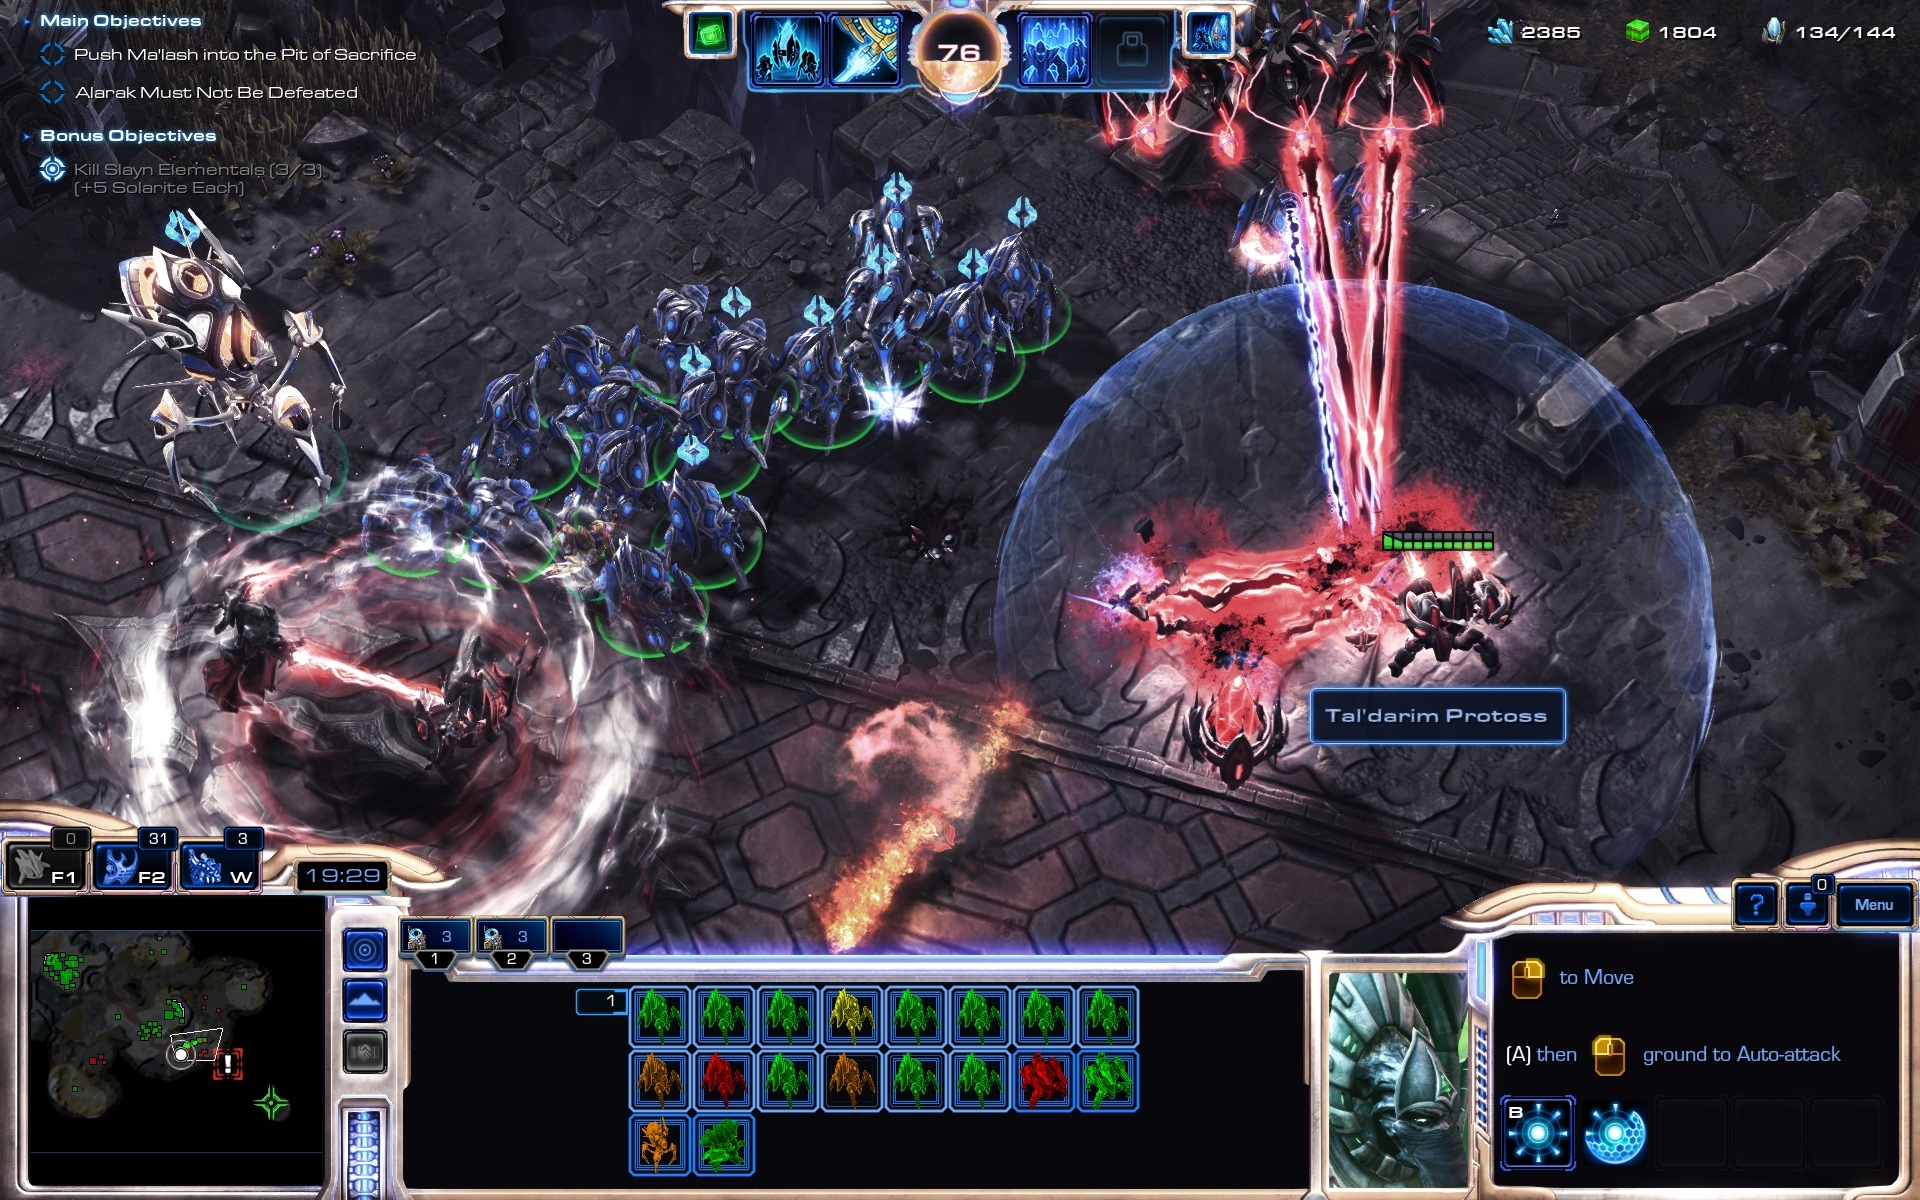 Starcraft II: Legacy of The Void